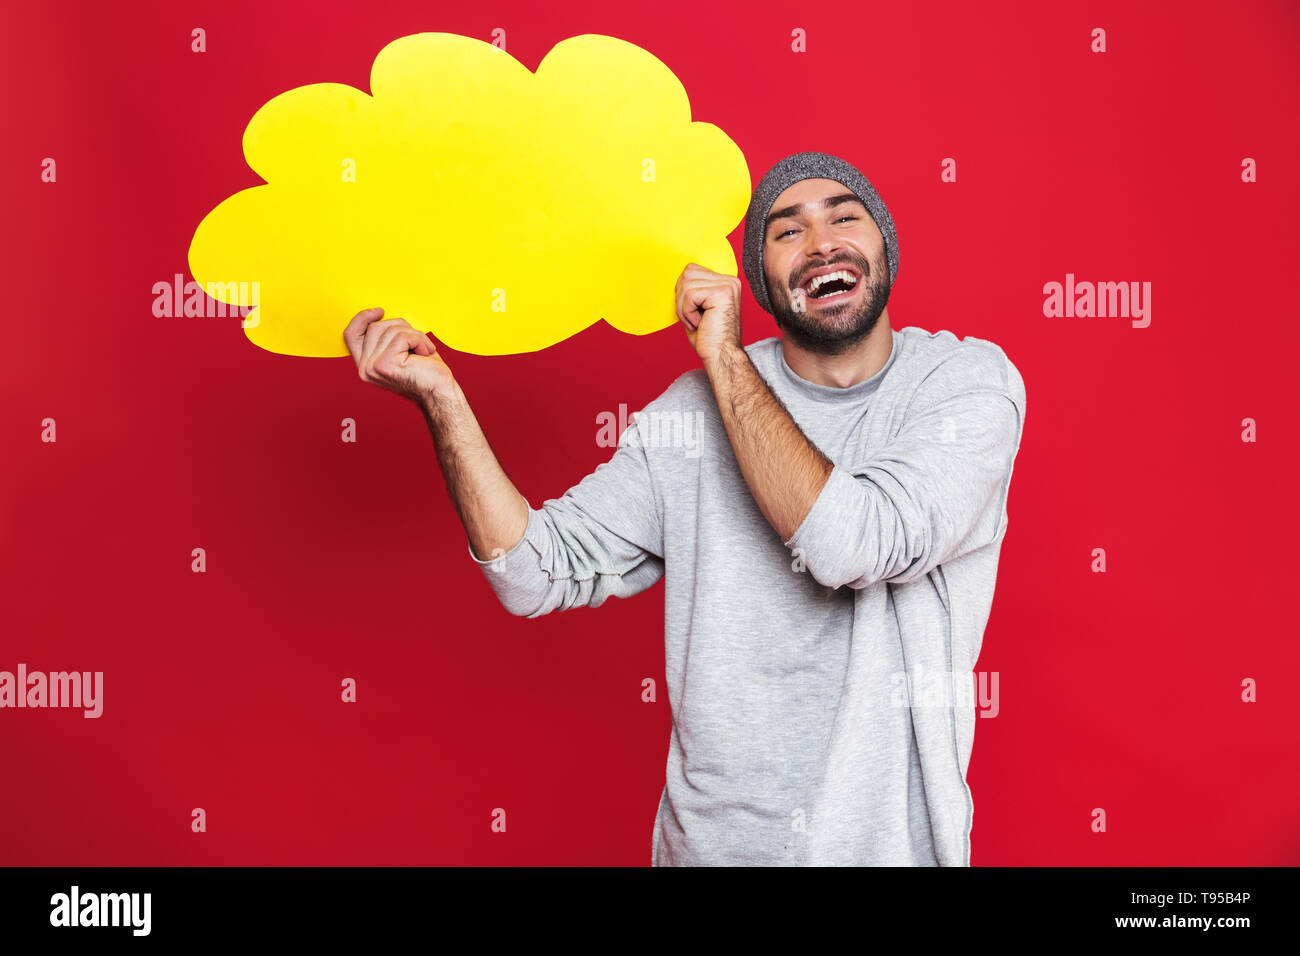 Photo of unshaved man 30s in casual wear smiling and holding blank thought bubble isolated over red background Stock Photo